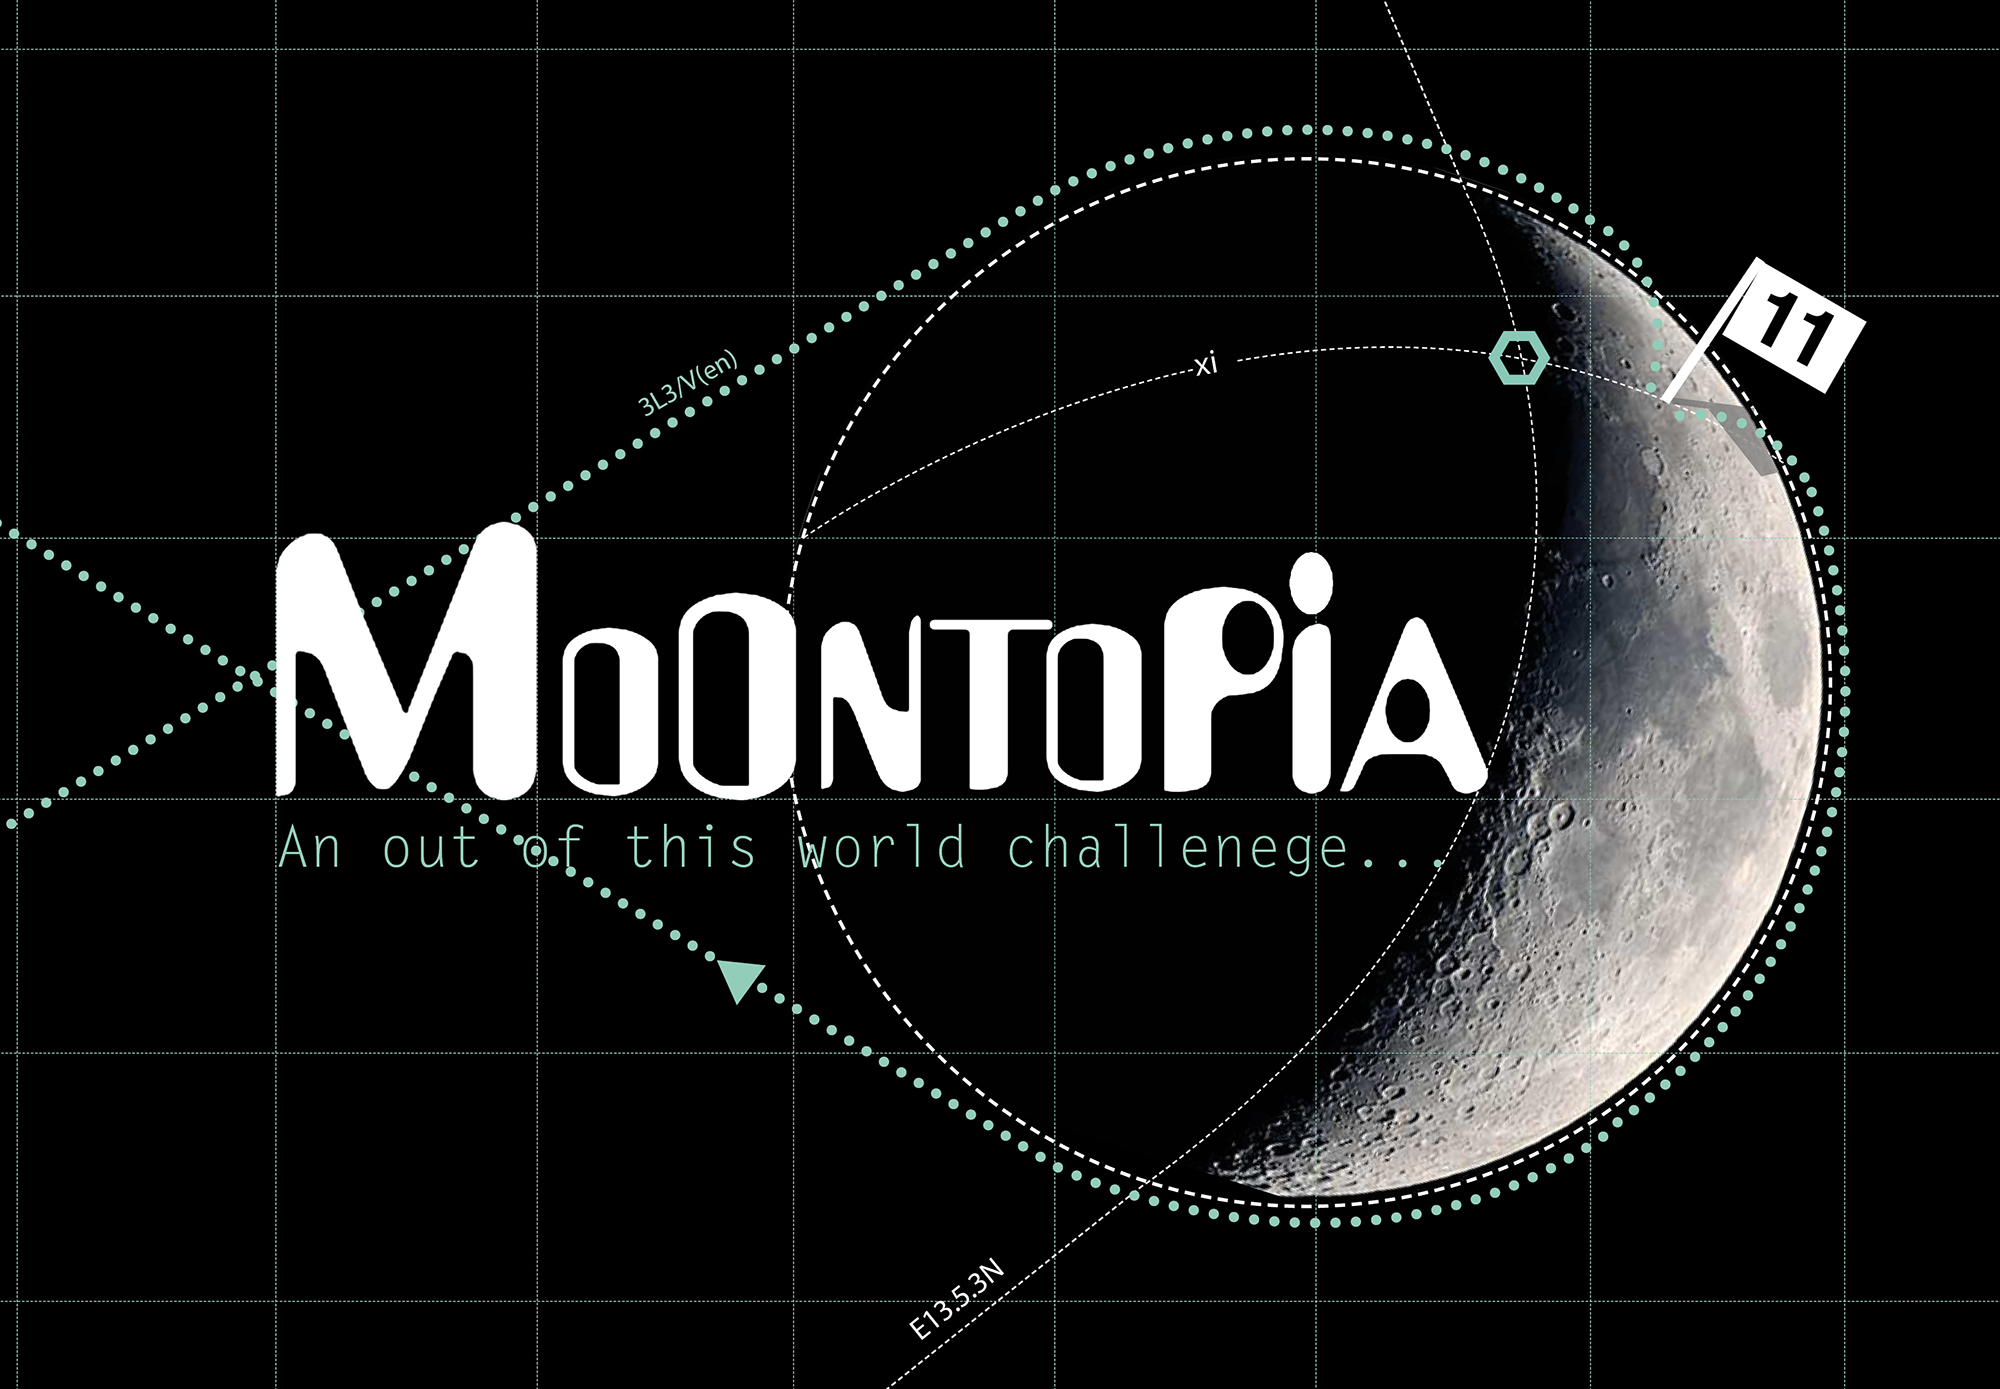 MOONTOPIA. An out of this world challenge...